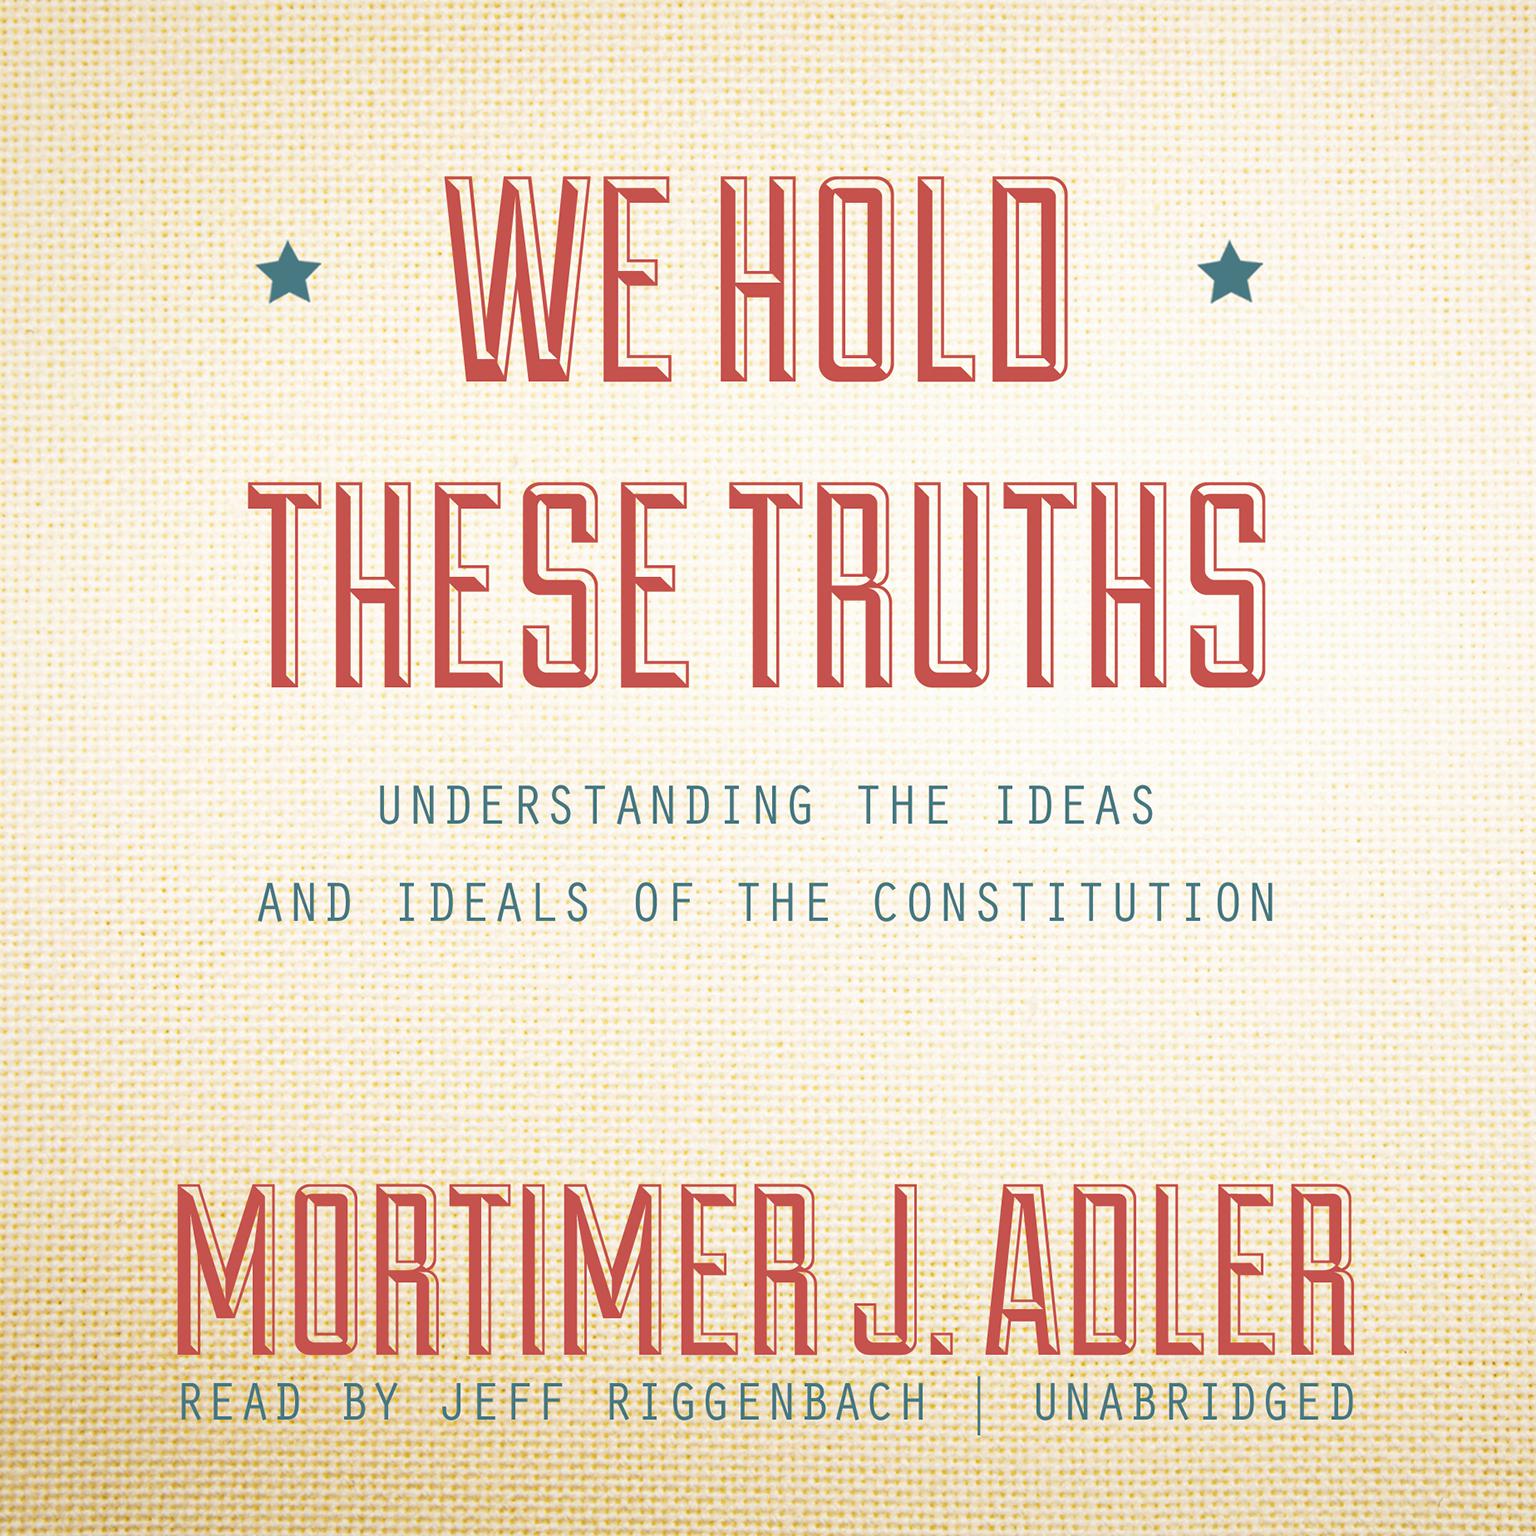 We Hold These Truths: Understanding the Ideas and Ideals of the Constitution Audiobook, by Mortimer J. Adler